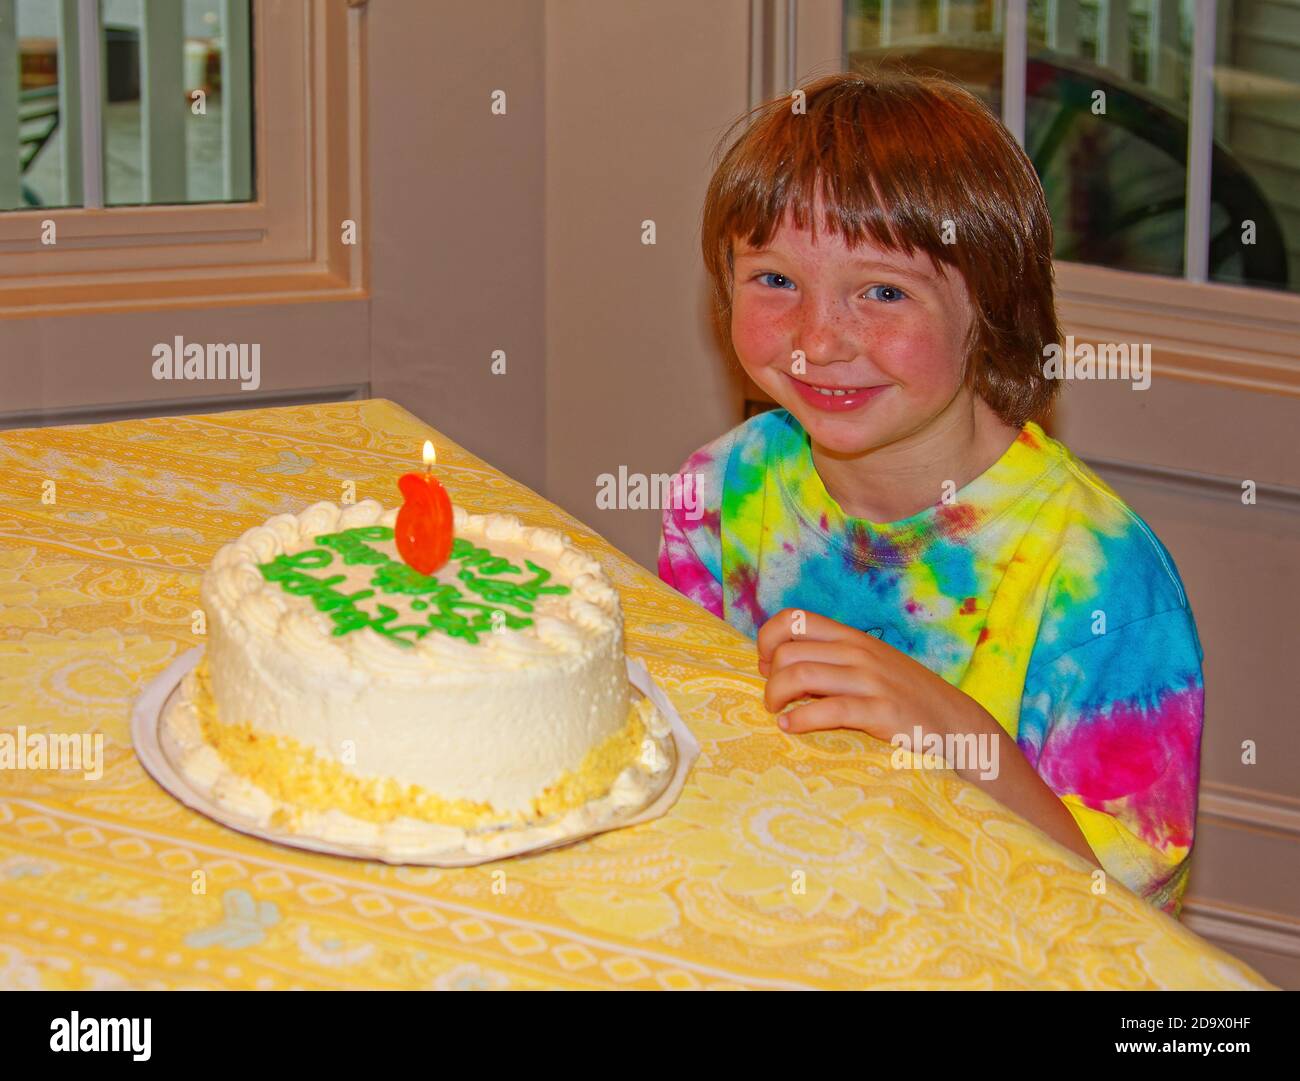 Birthday Cake 6 Years Old High Resolution Stock Photography And Images Alamy